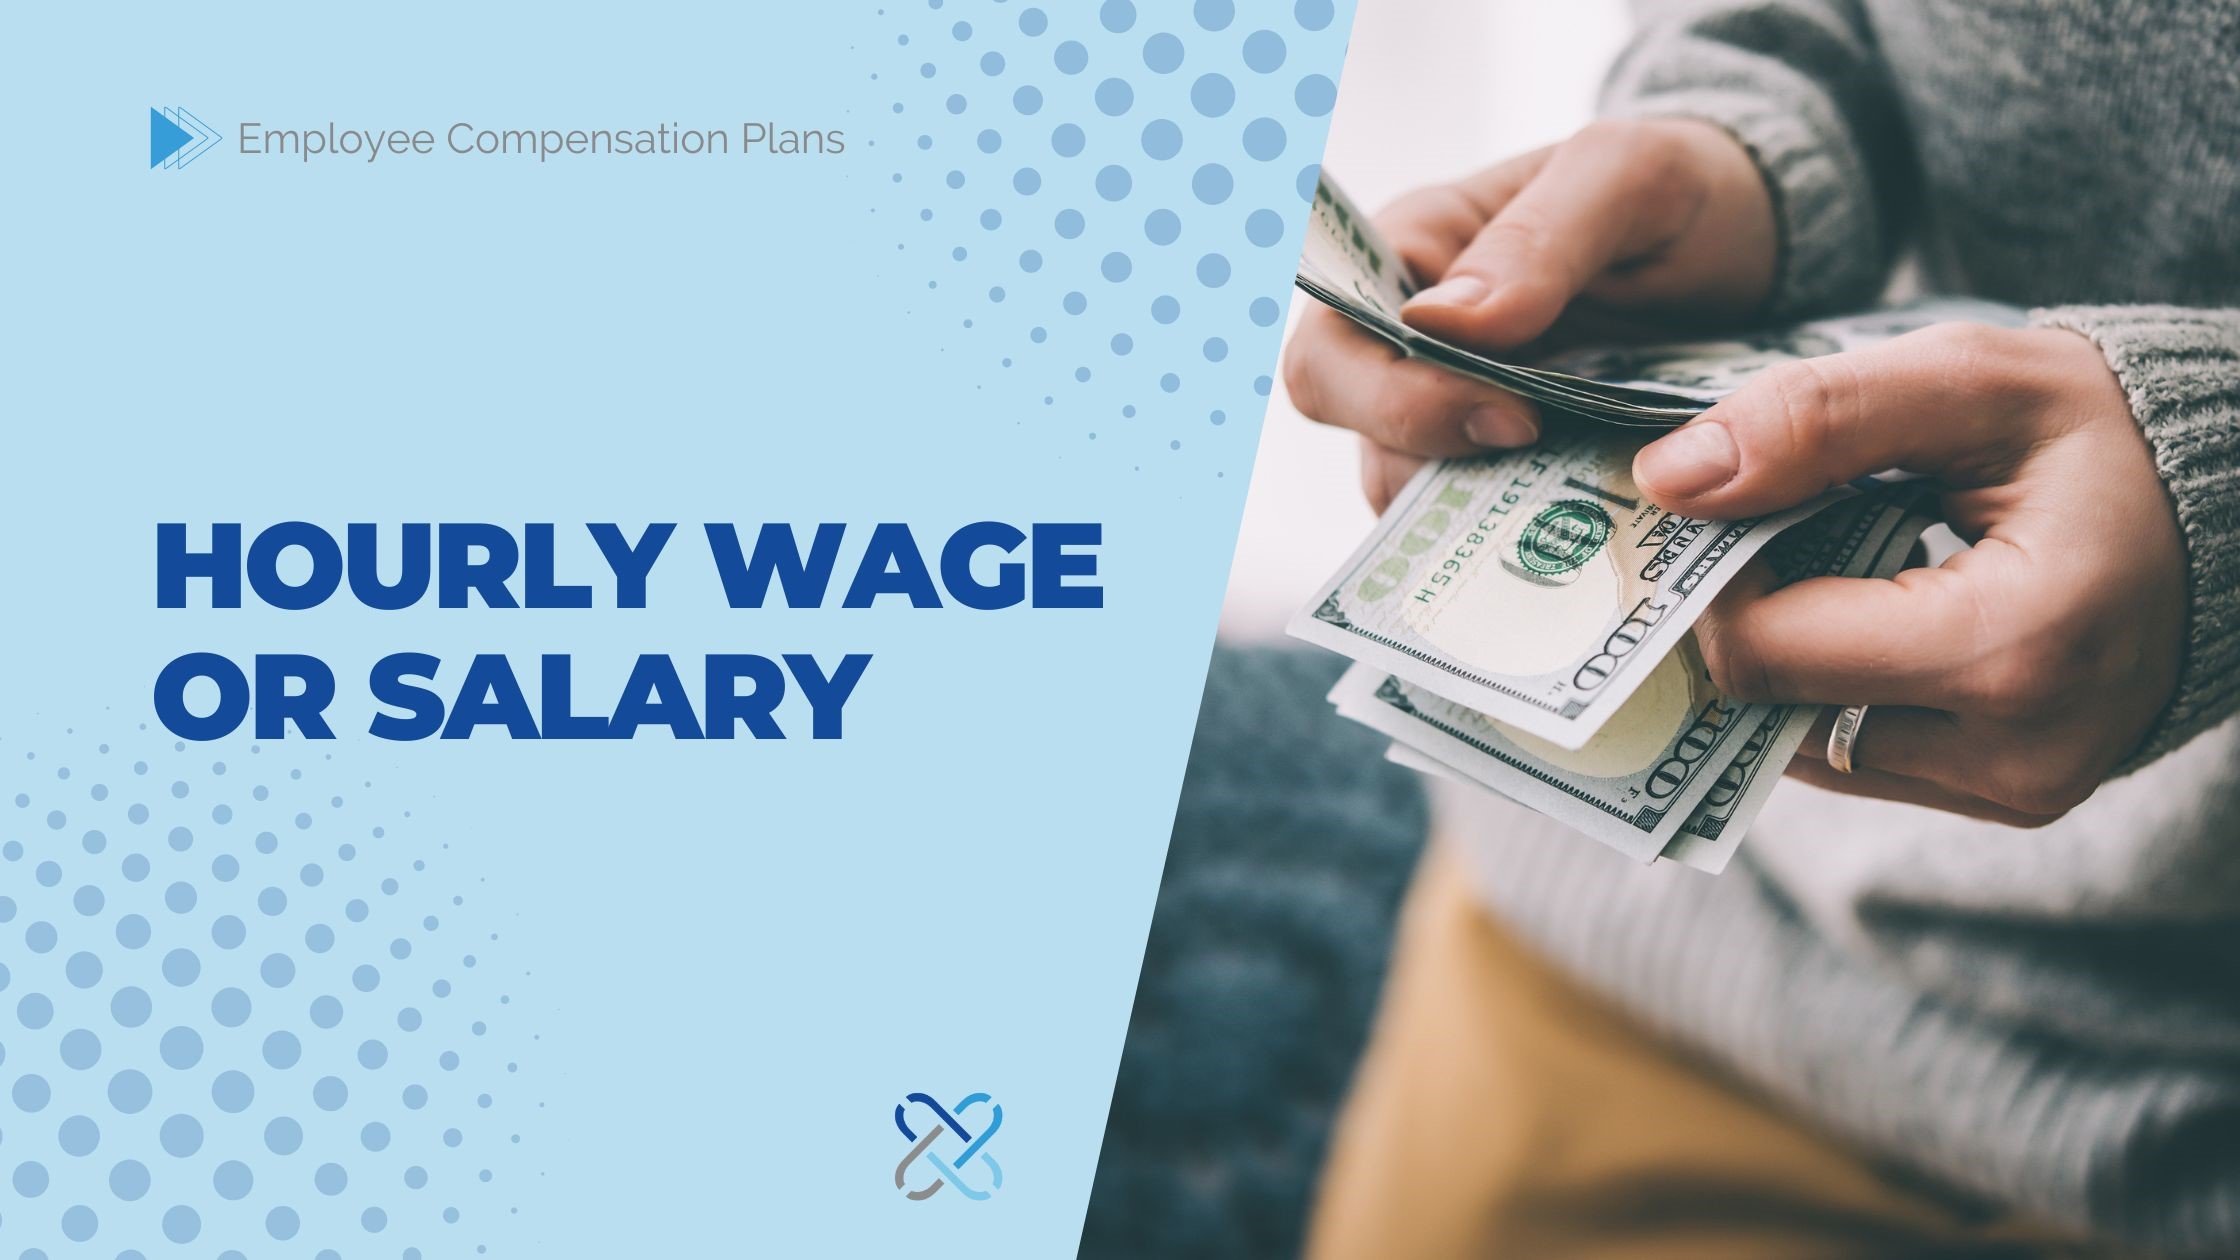 Employee Compensation Plans: The 5 Main Components - Solutions For